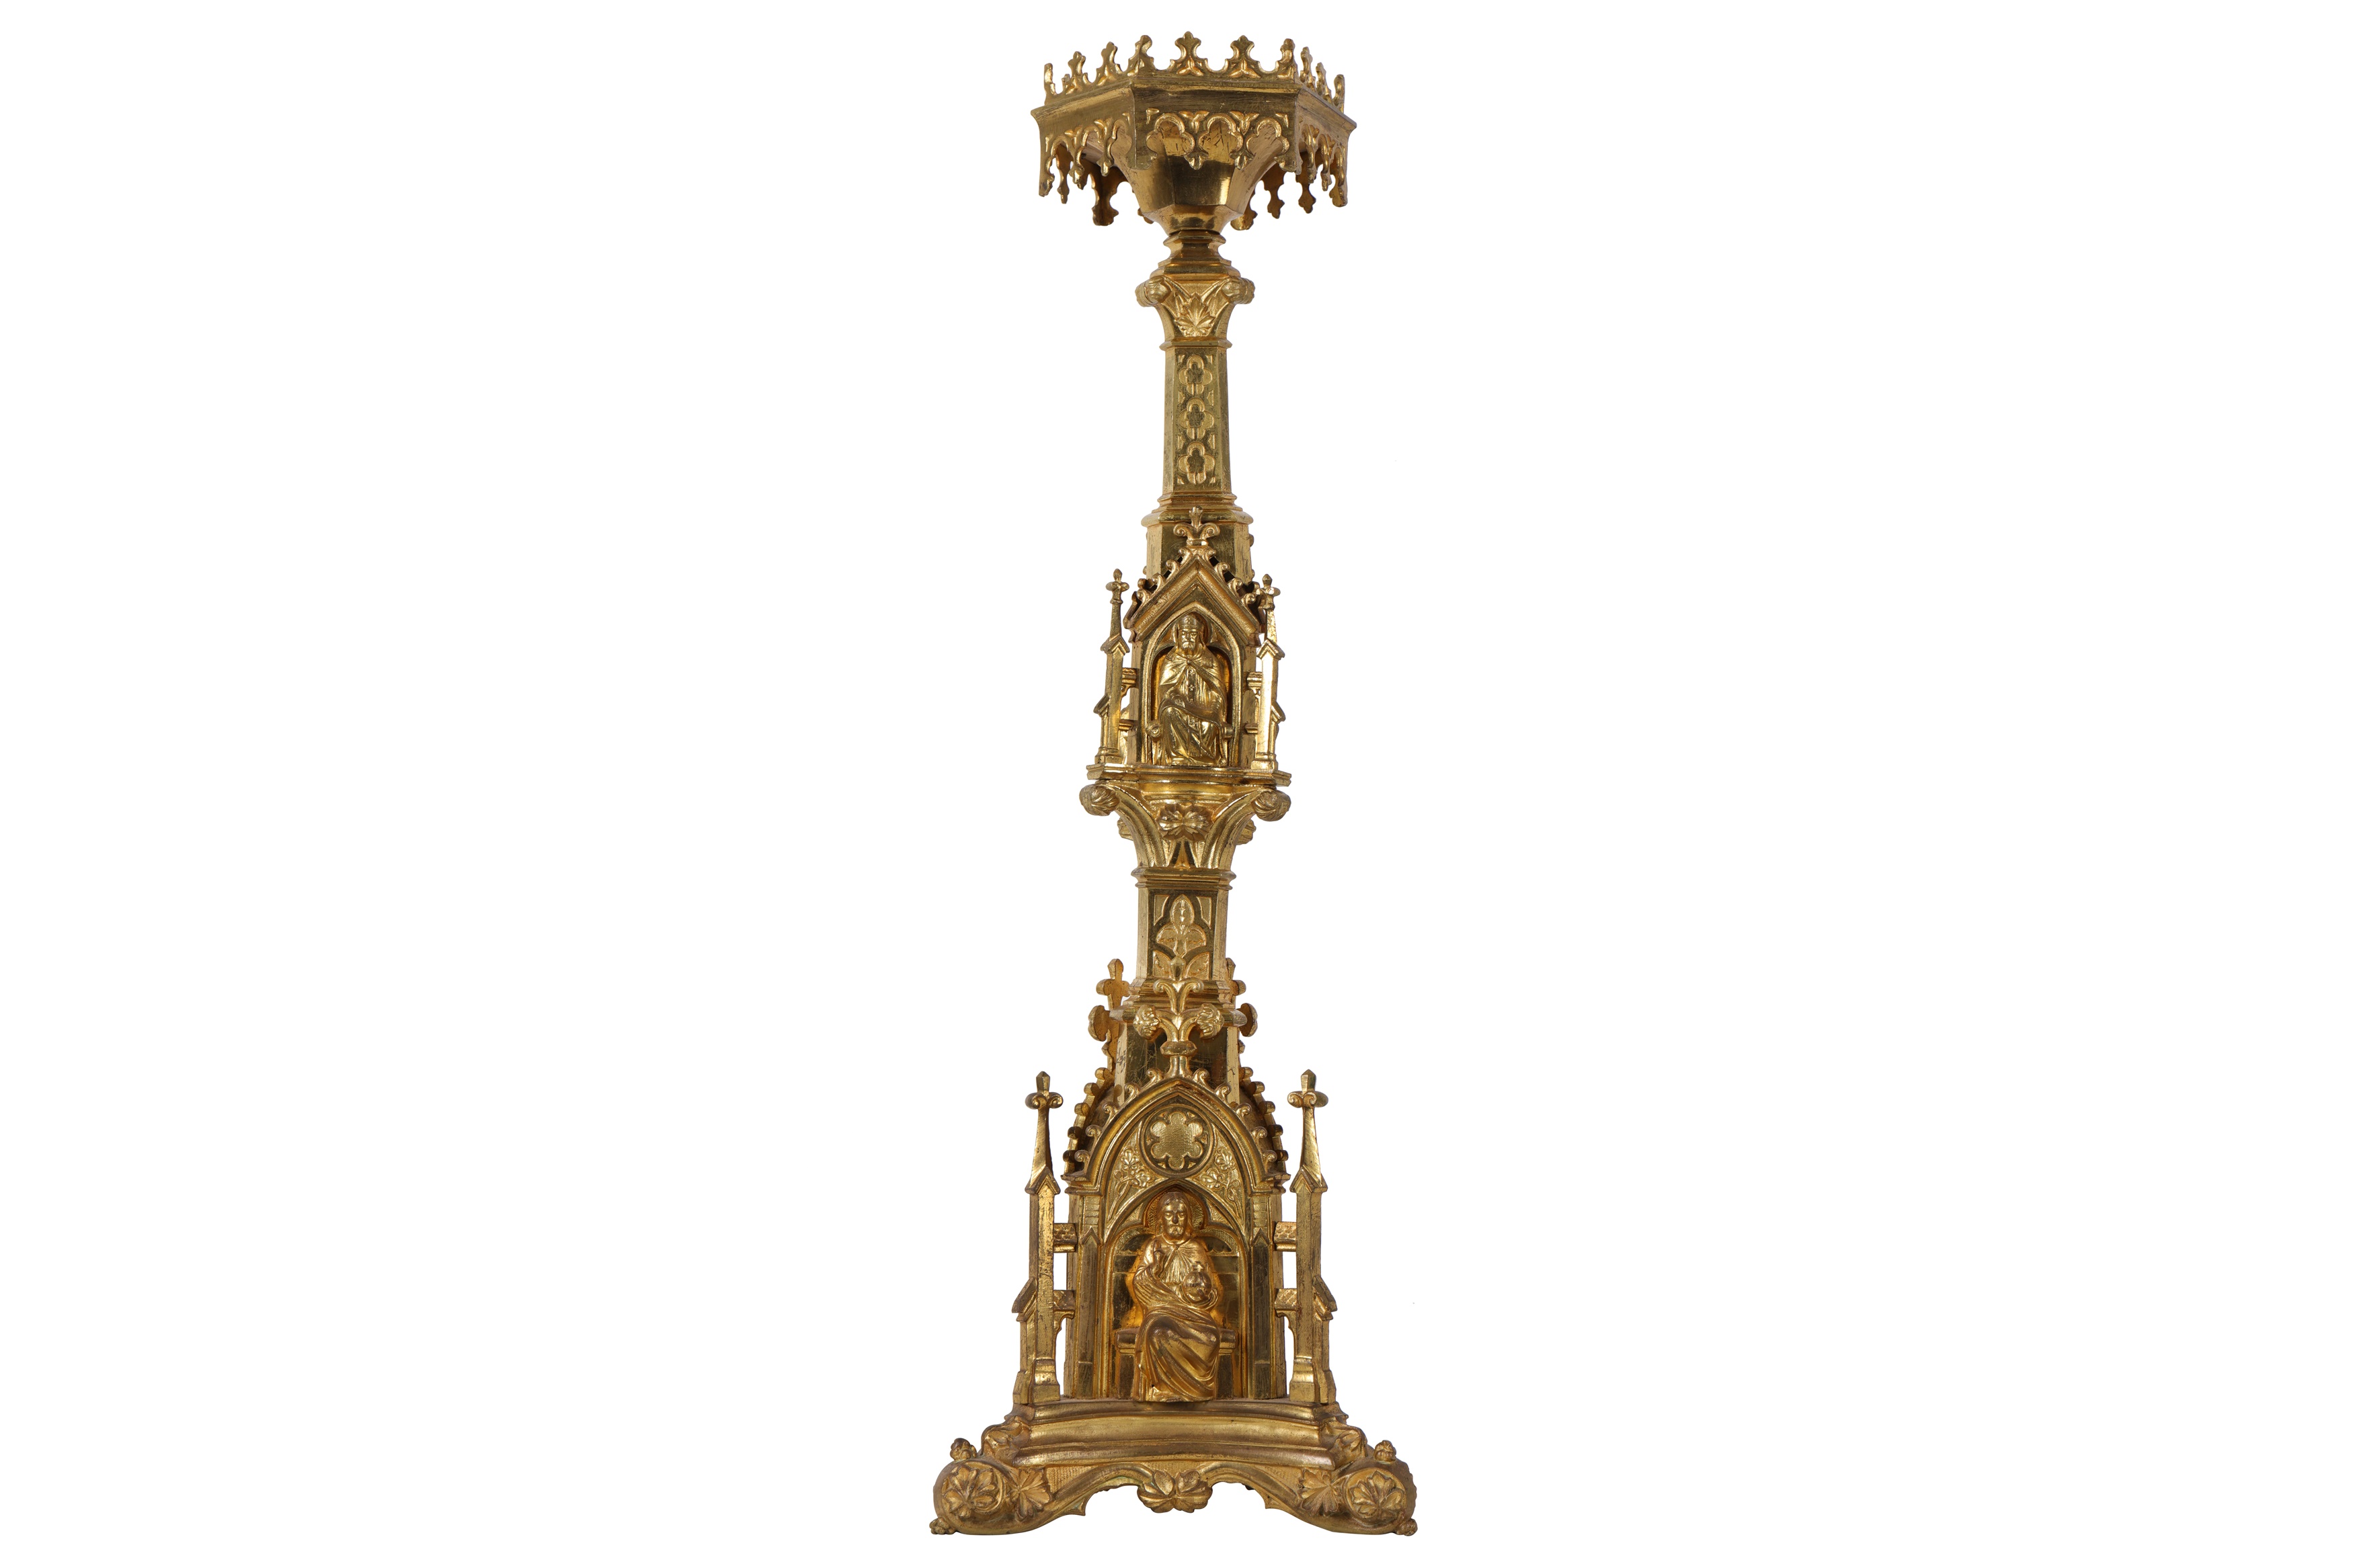 A 19TH CENTURY FRENCH NEO-GOTHIC GILT BRONZE ECCLESIASTICAL CANDLE HOLDER